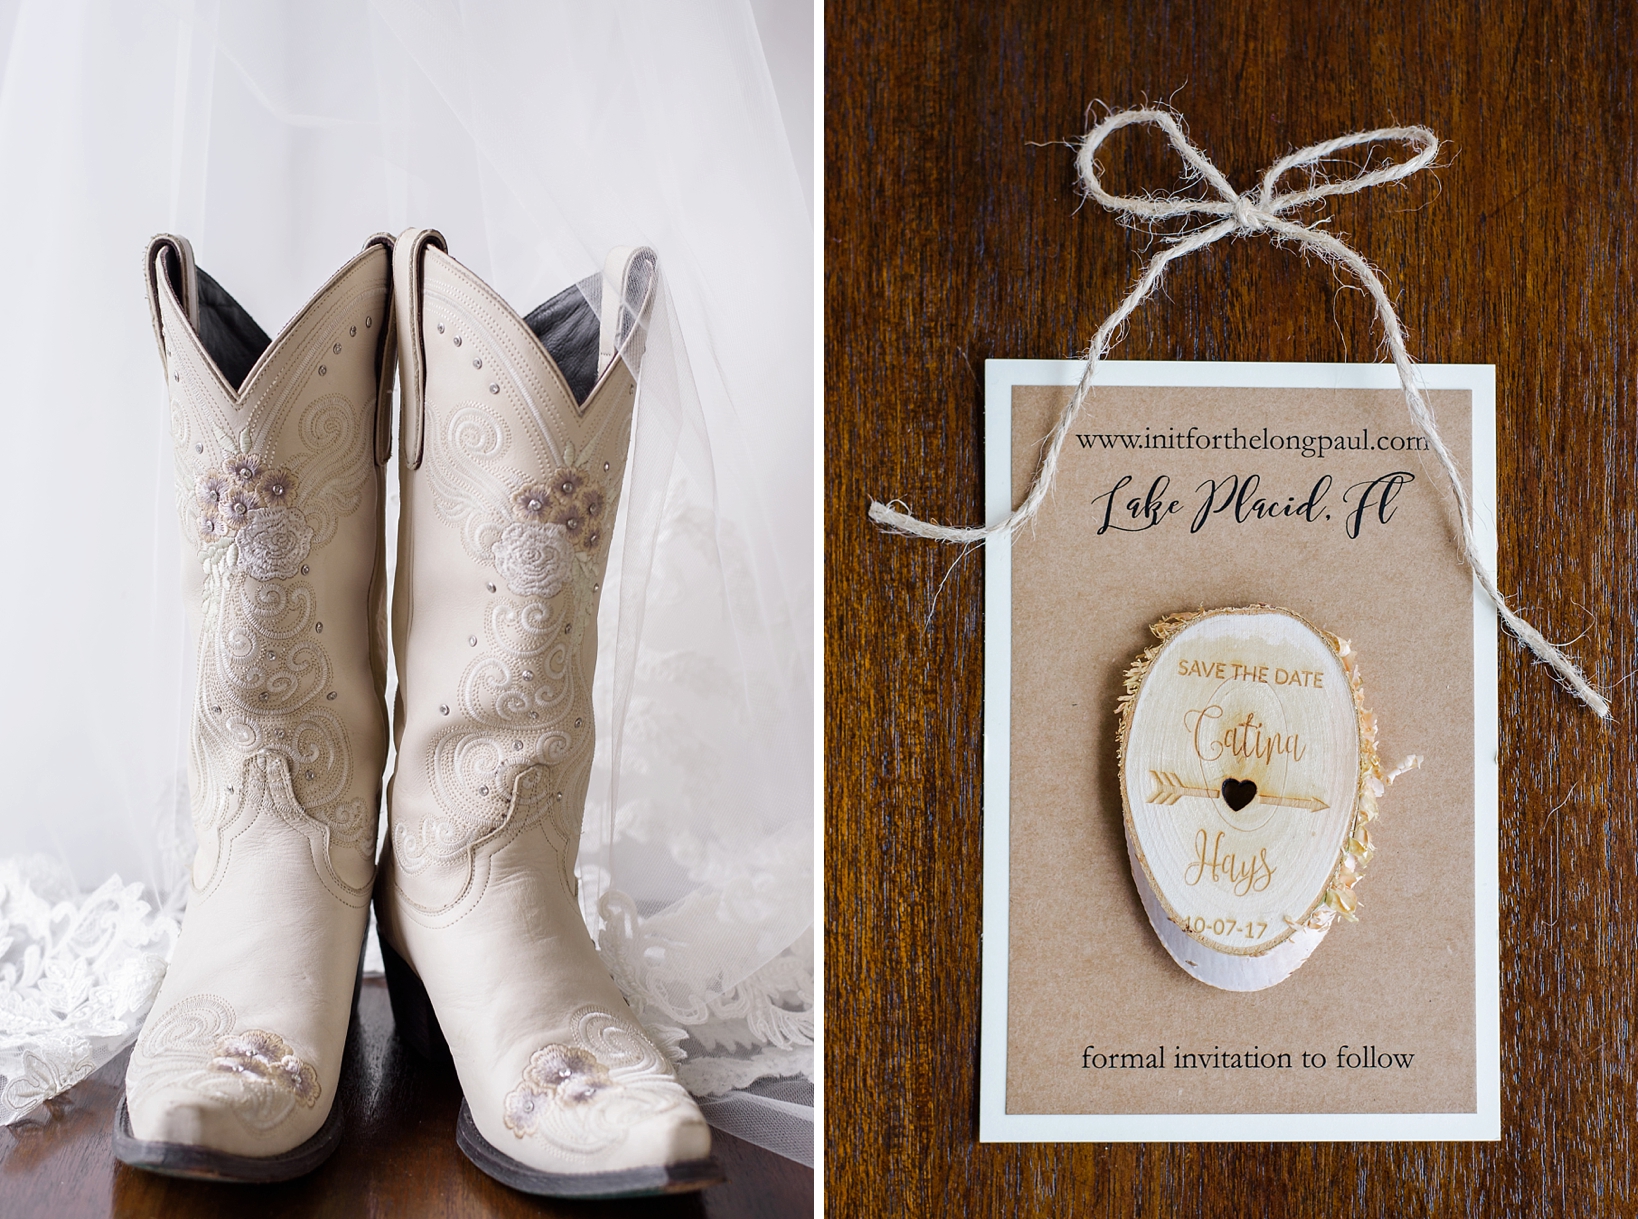 Bridal boots and veil along with save the date magnet made from burned wood